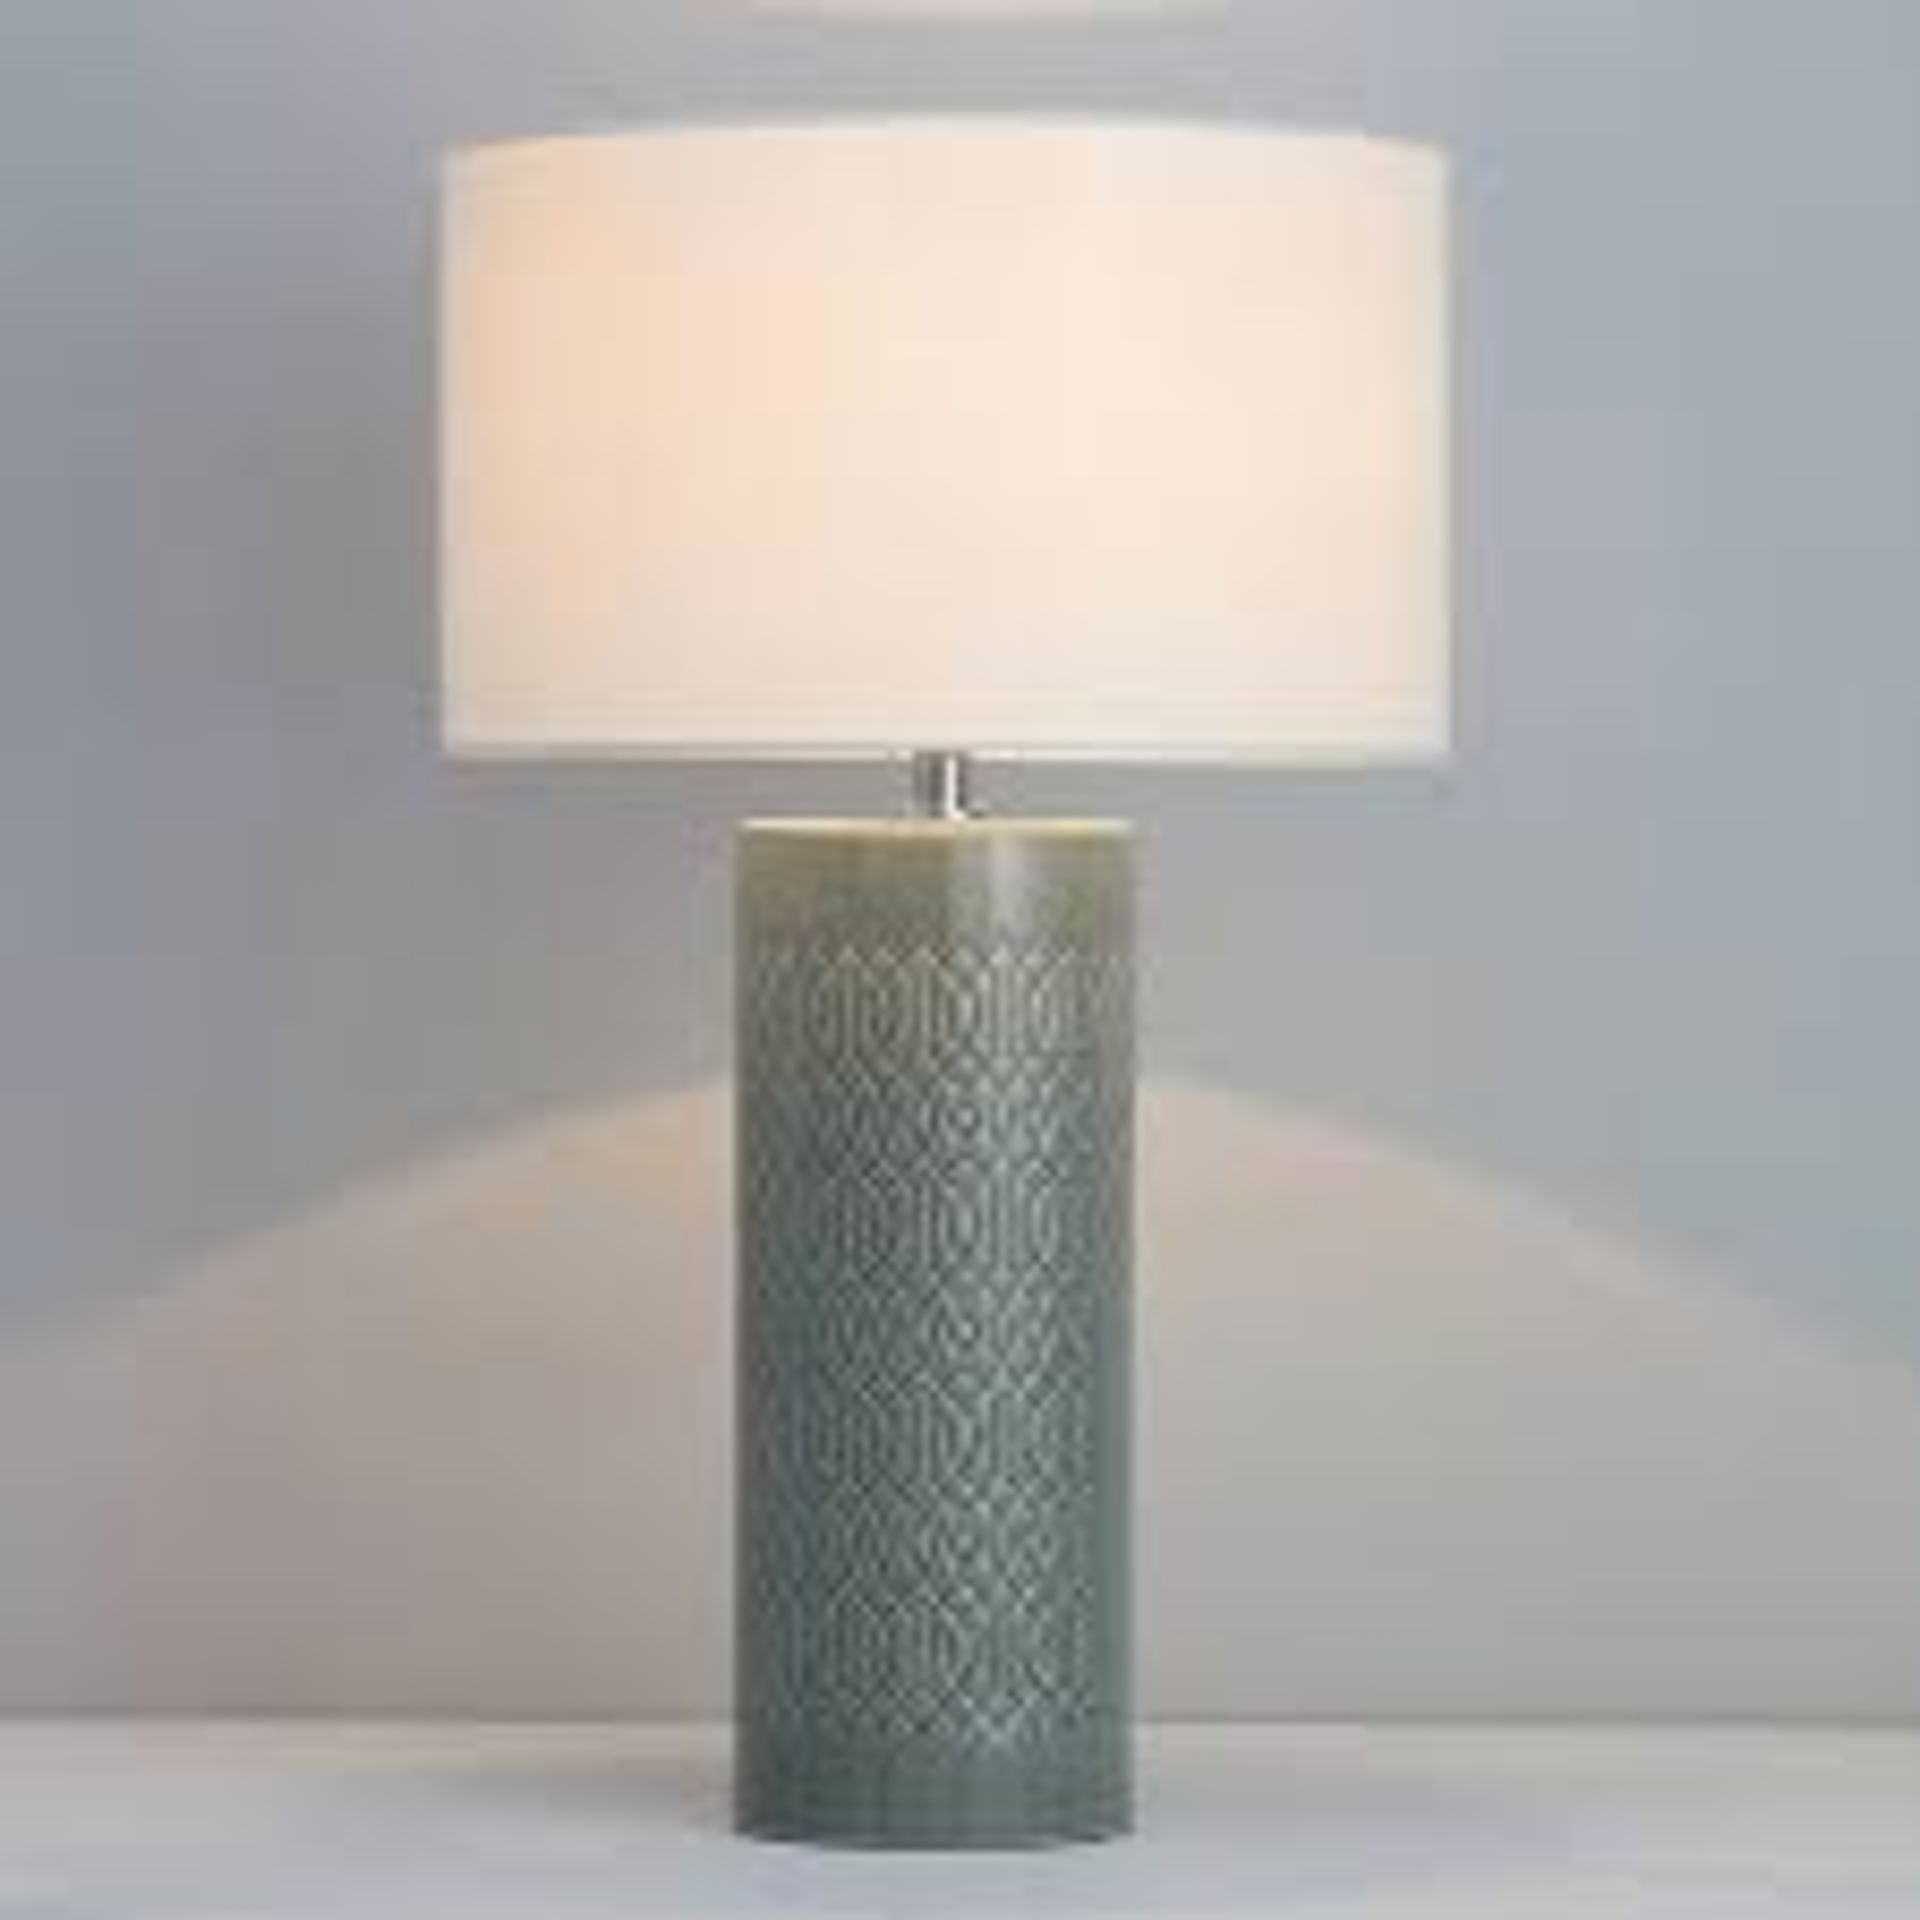 Inlight Dactyl Embossed Grey Cylinder Table light. - P4. This grey ceramic table light features a